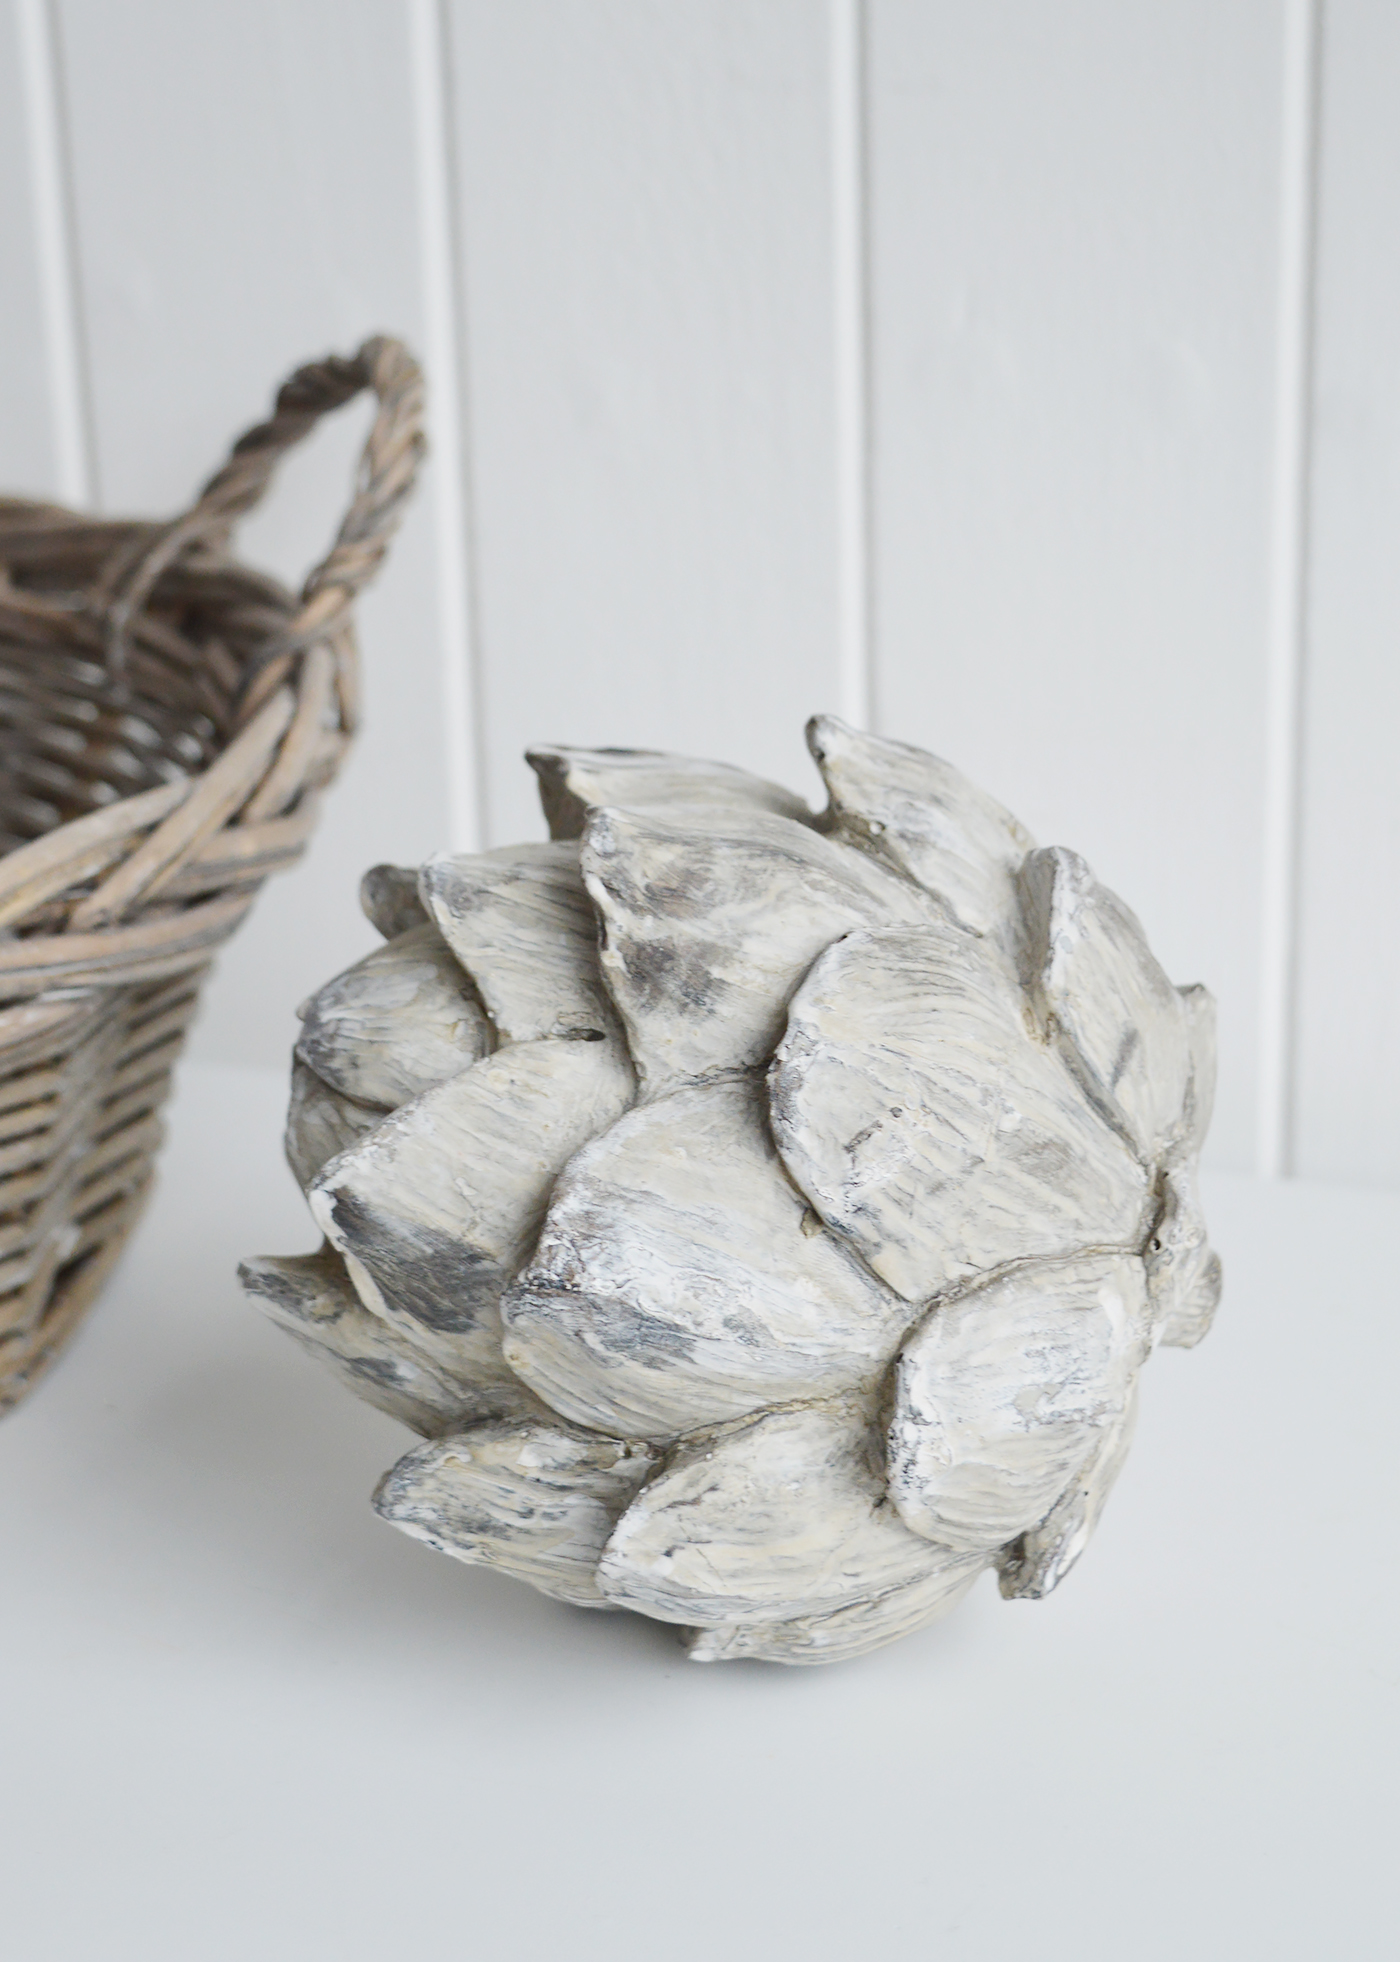 Decorative grey distressed artichoke for New England style furniture and home decor